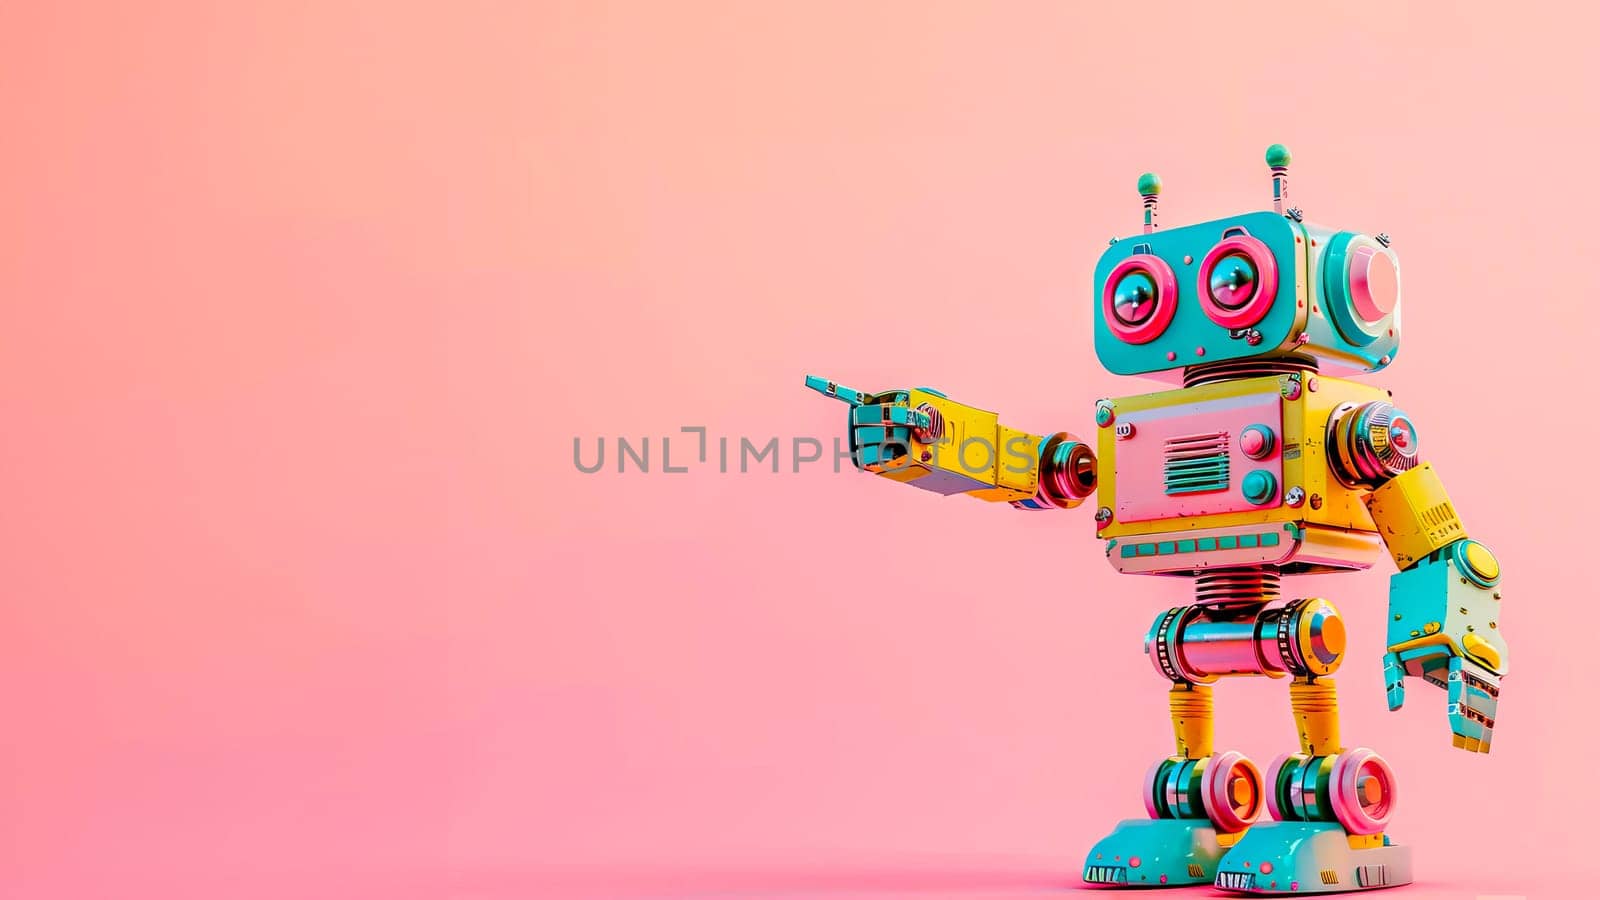 Colorful toy robot with a happy expression pointing at something on a bright pink backdrop.